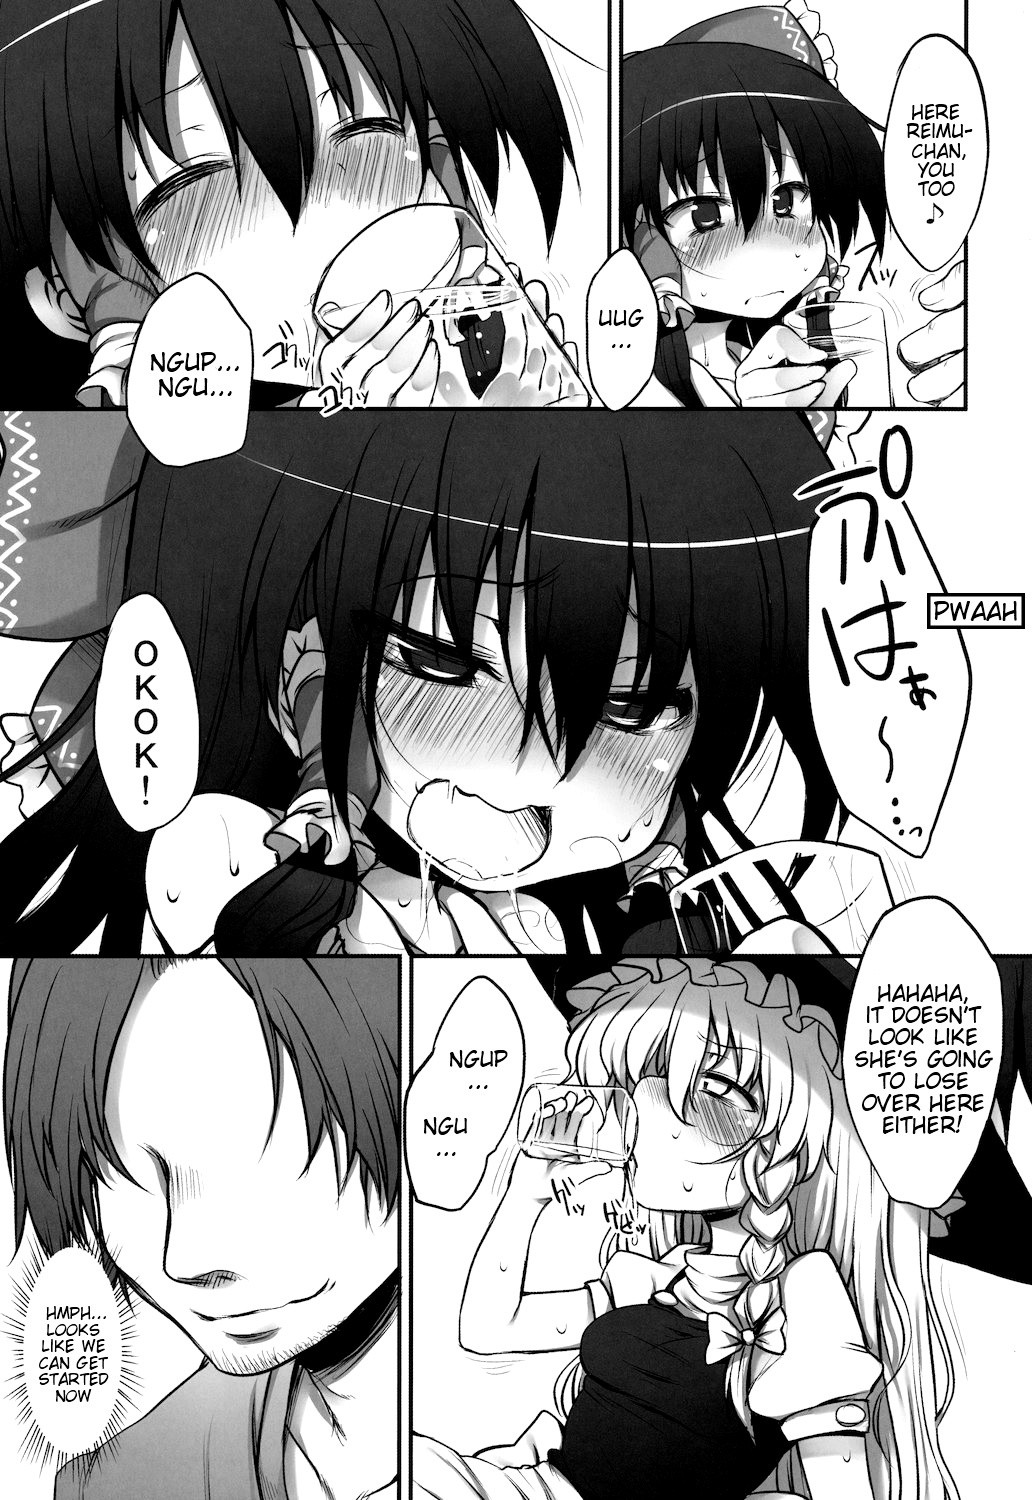 THE PARTY of Gensoukyou -Part I hentai manga picture 8